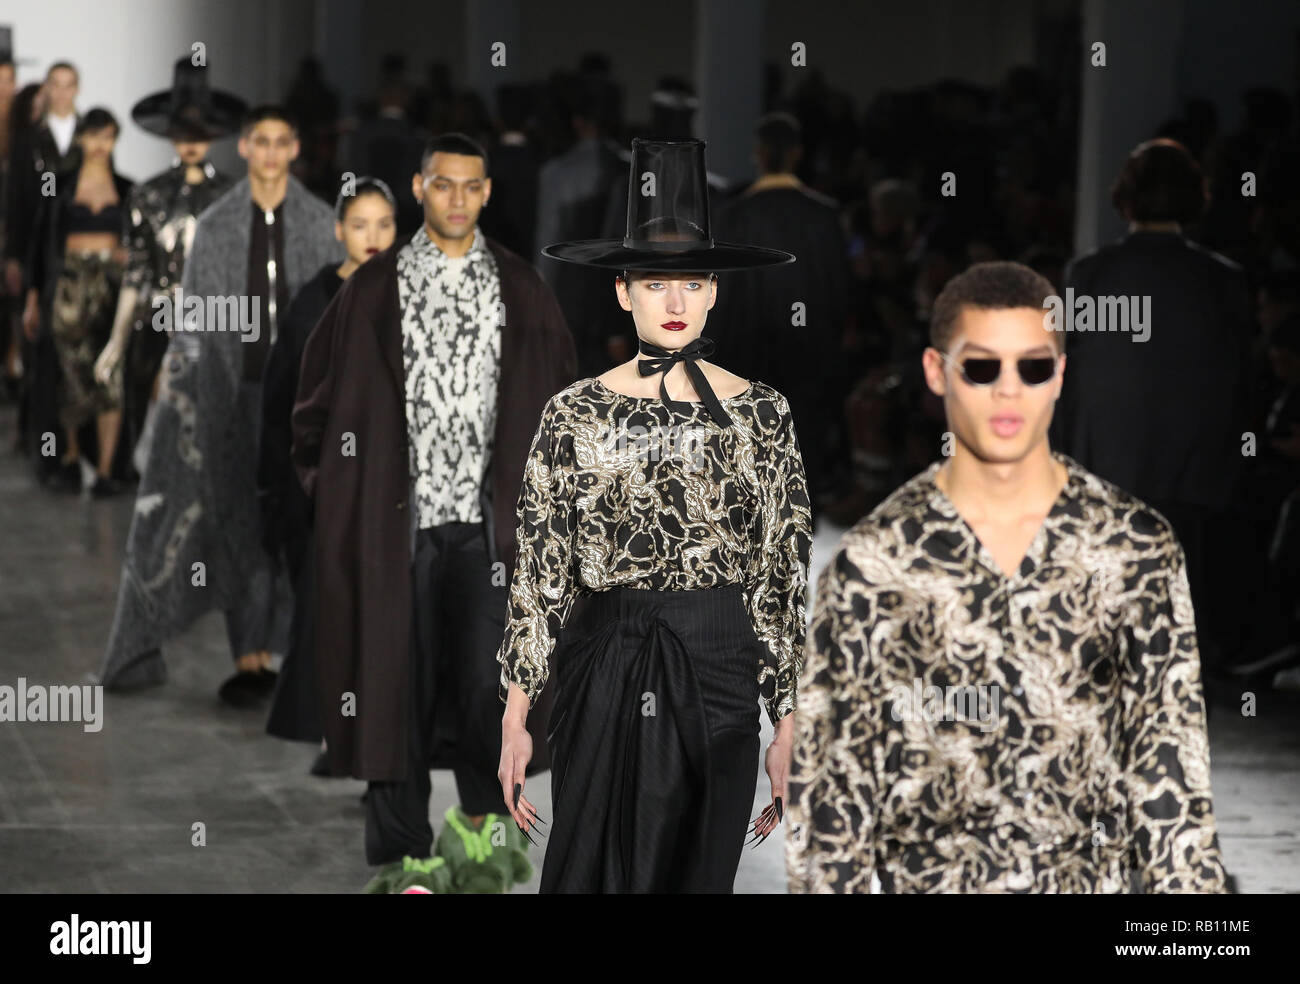 Models on the catwalk during the Edward Crutchley London Fashion Week Men's AW19 show held at BFC Show Space, London. Picture date: Saturday 5 January, 2019. Photo credit should read: Isabel Infantes/PA Wire Stock Photo